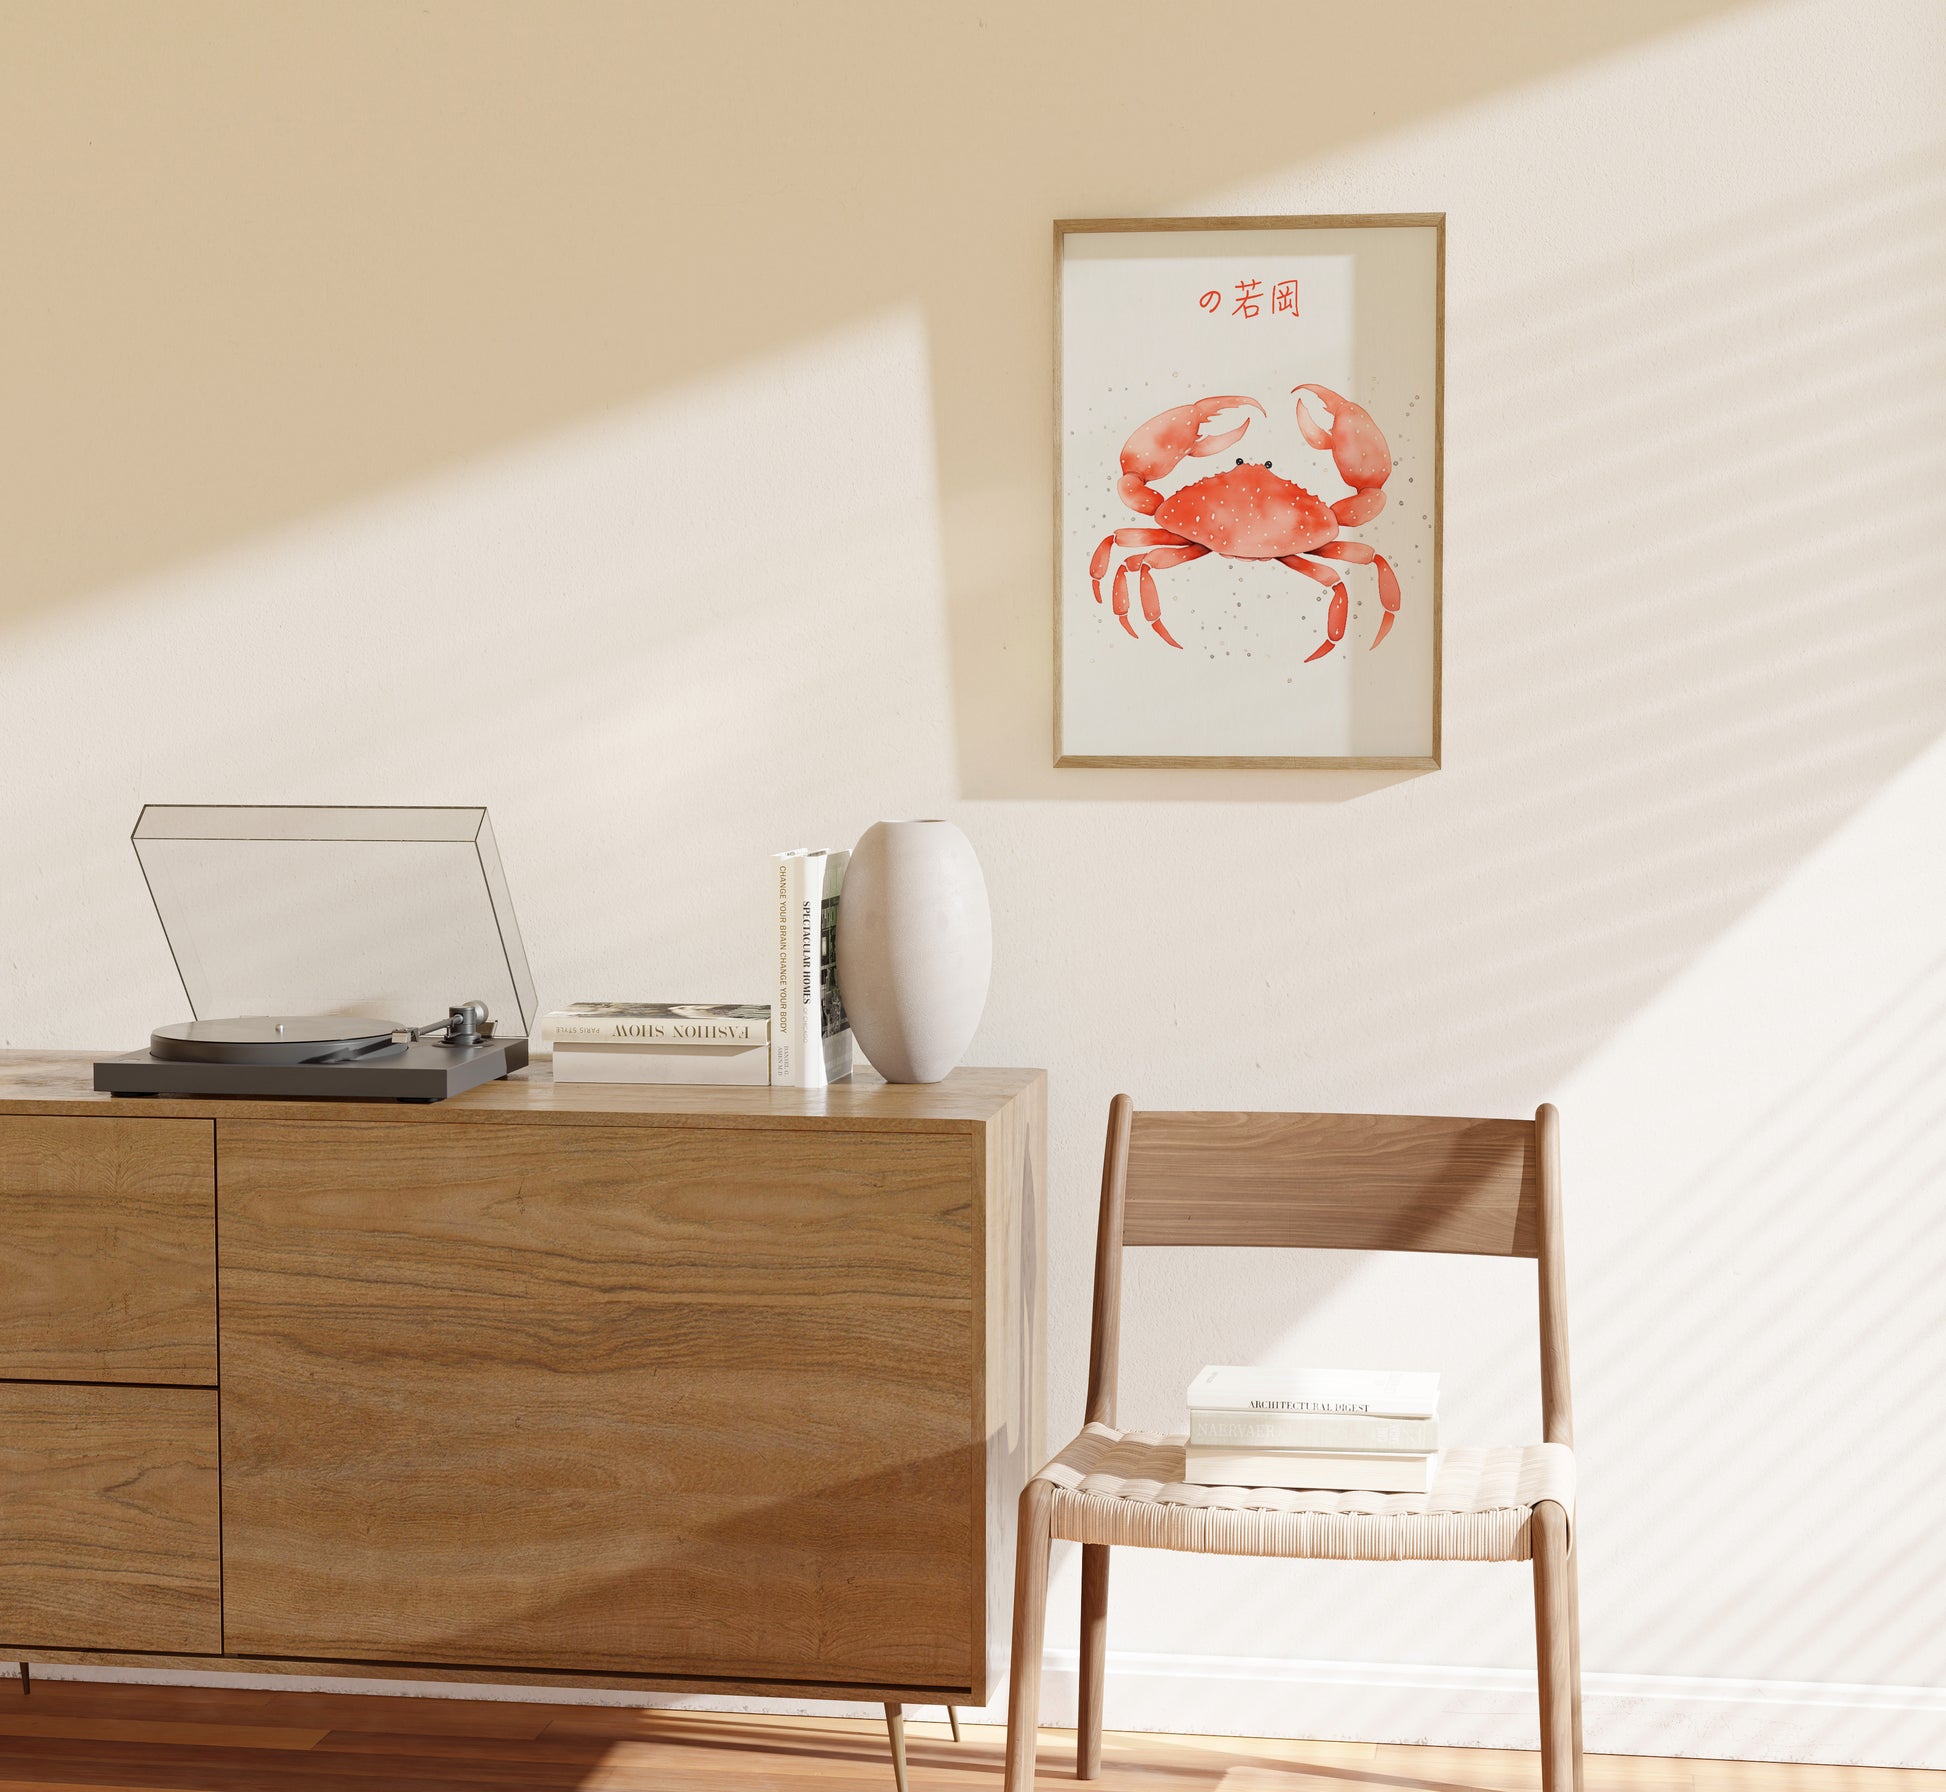 A cozy room corner with a wooden cabinet, record player, and a framed crab illustration on the wall.